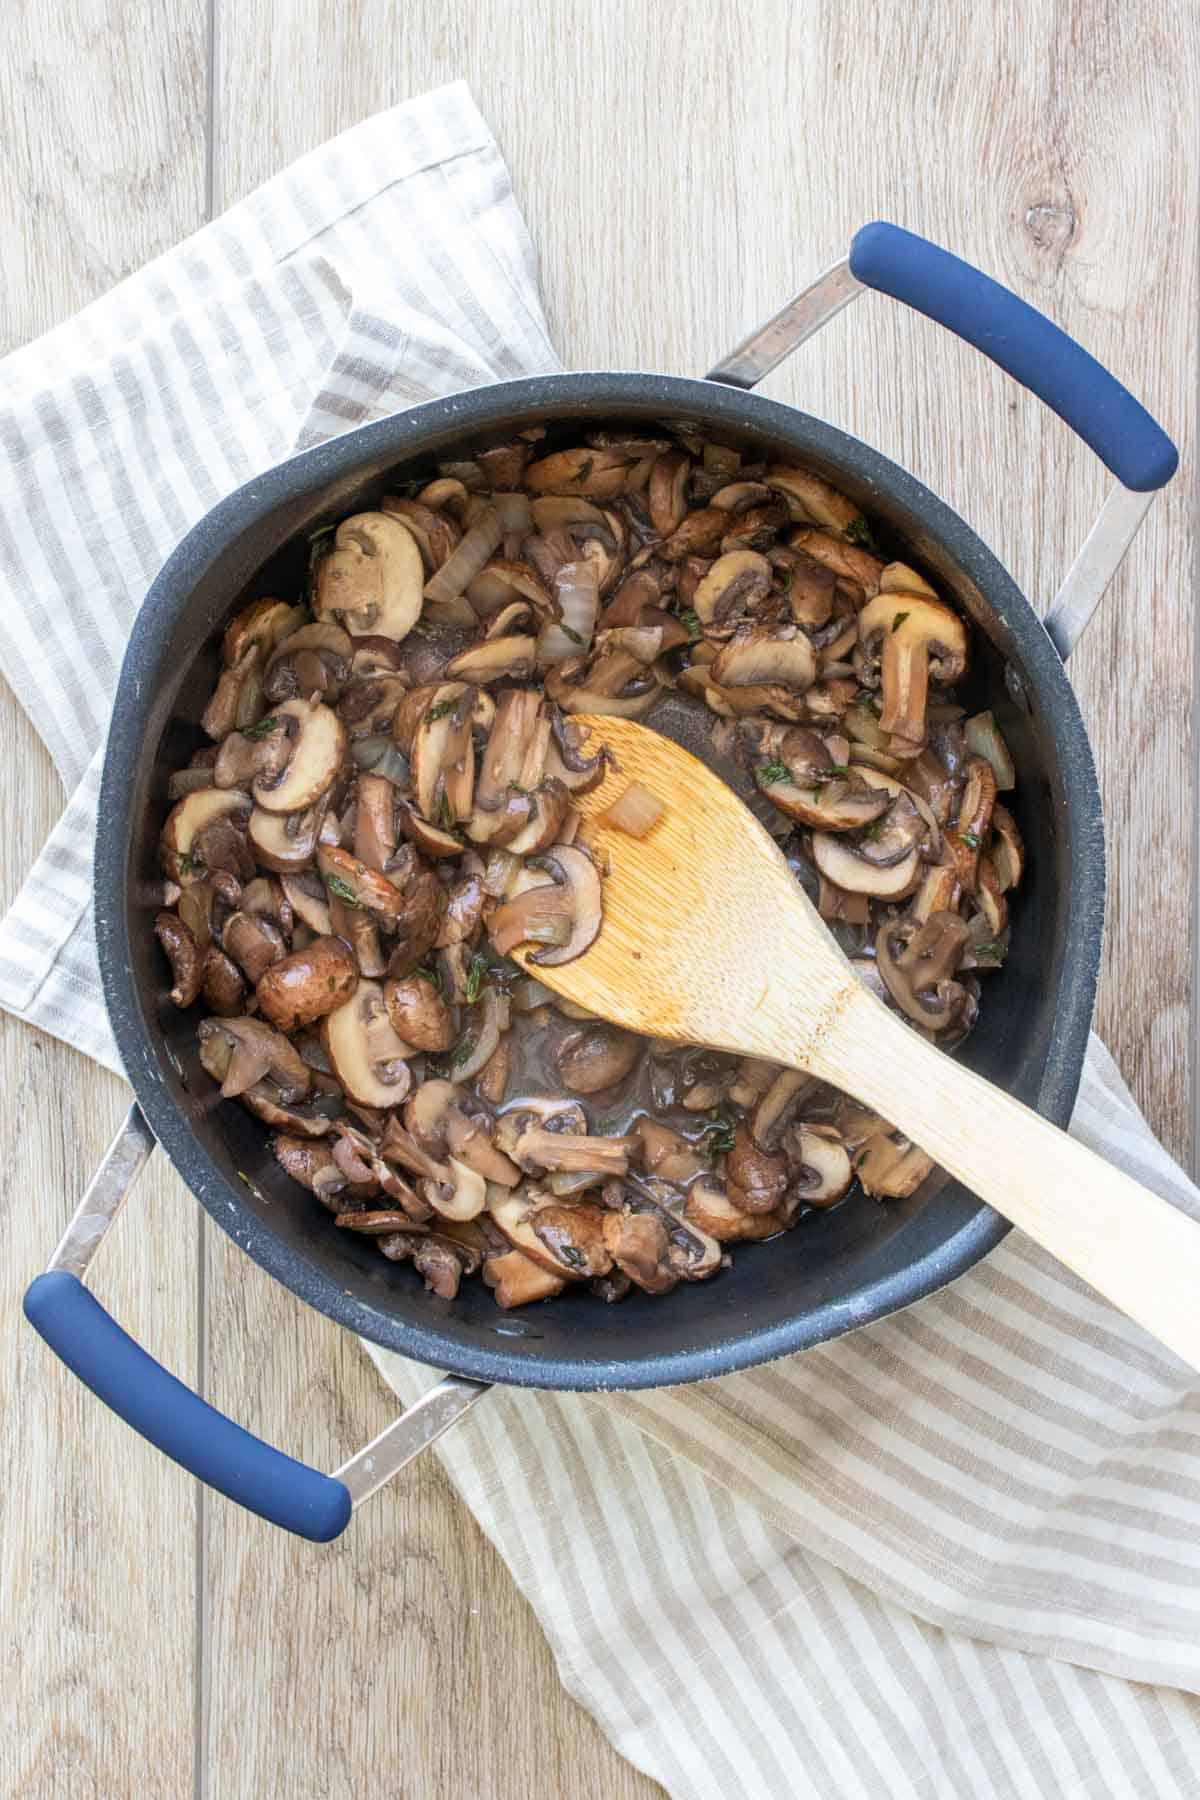 A wooden spoon mixing mushrooms in a black pot sitting on a tan striped towel